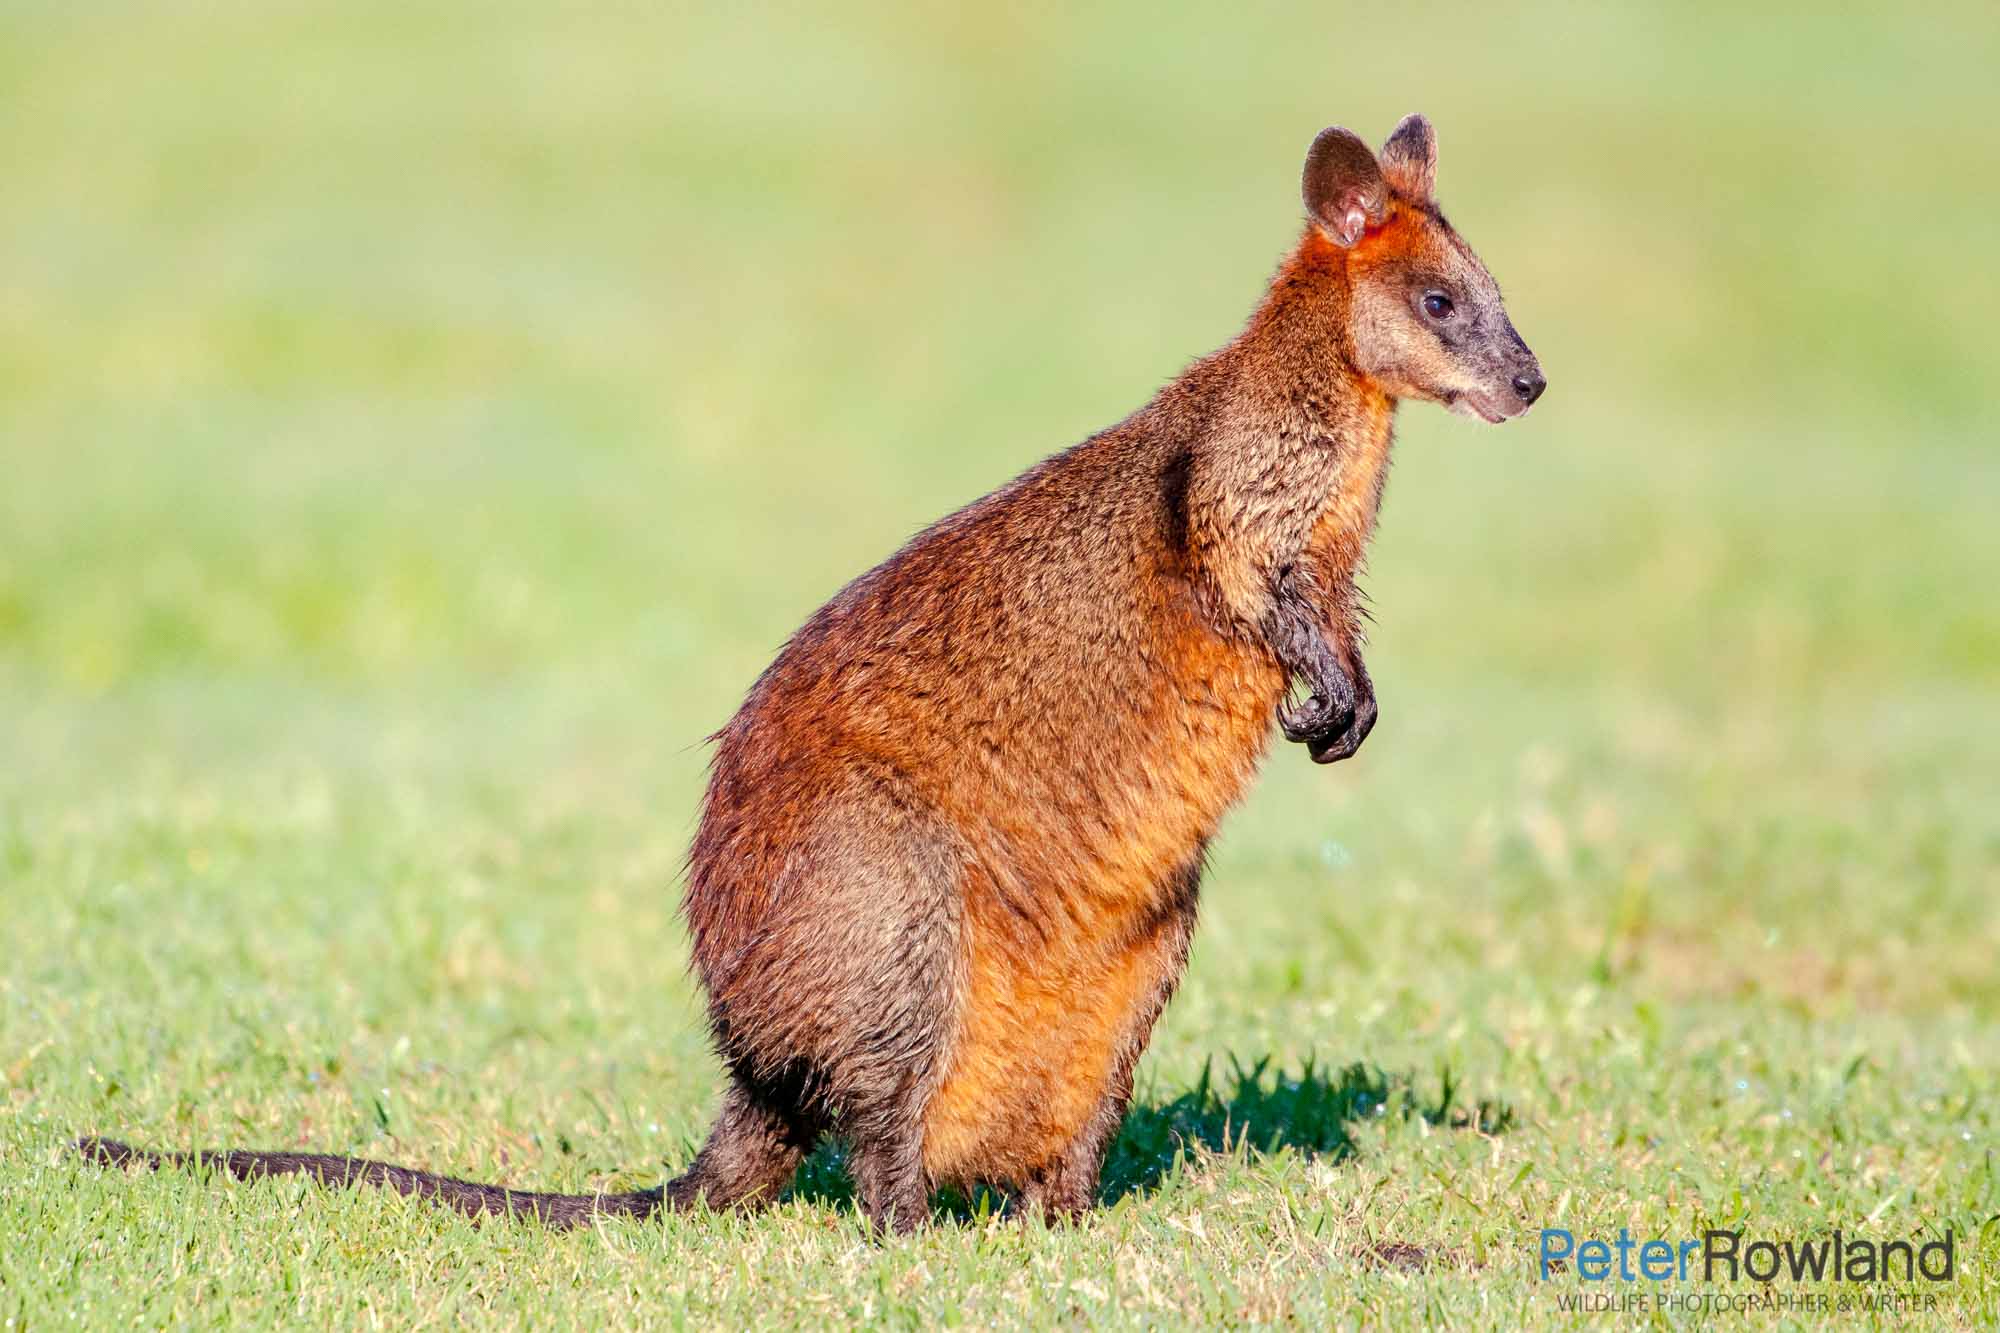 A Swamp Wallaby standing in a grassy clearing